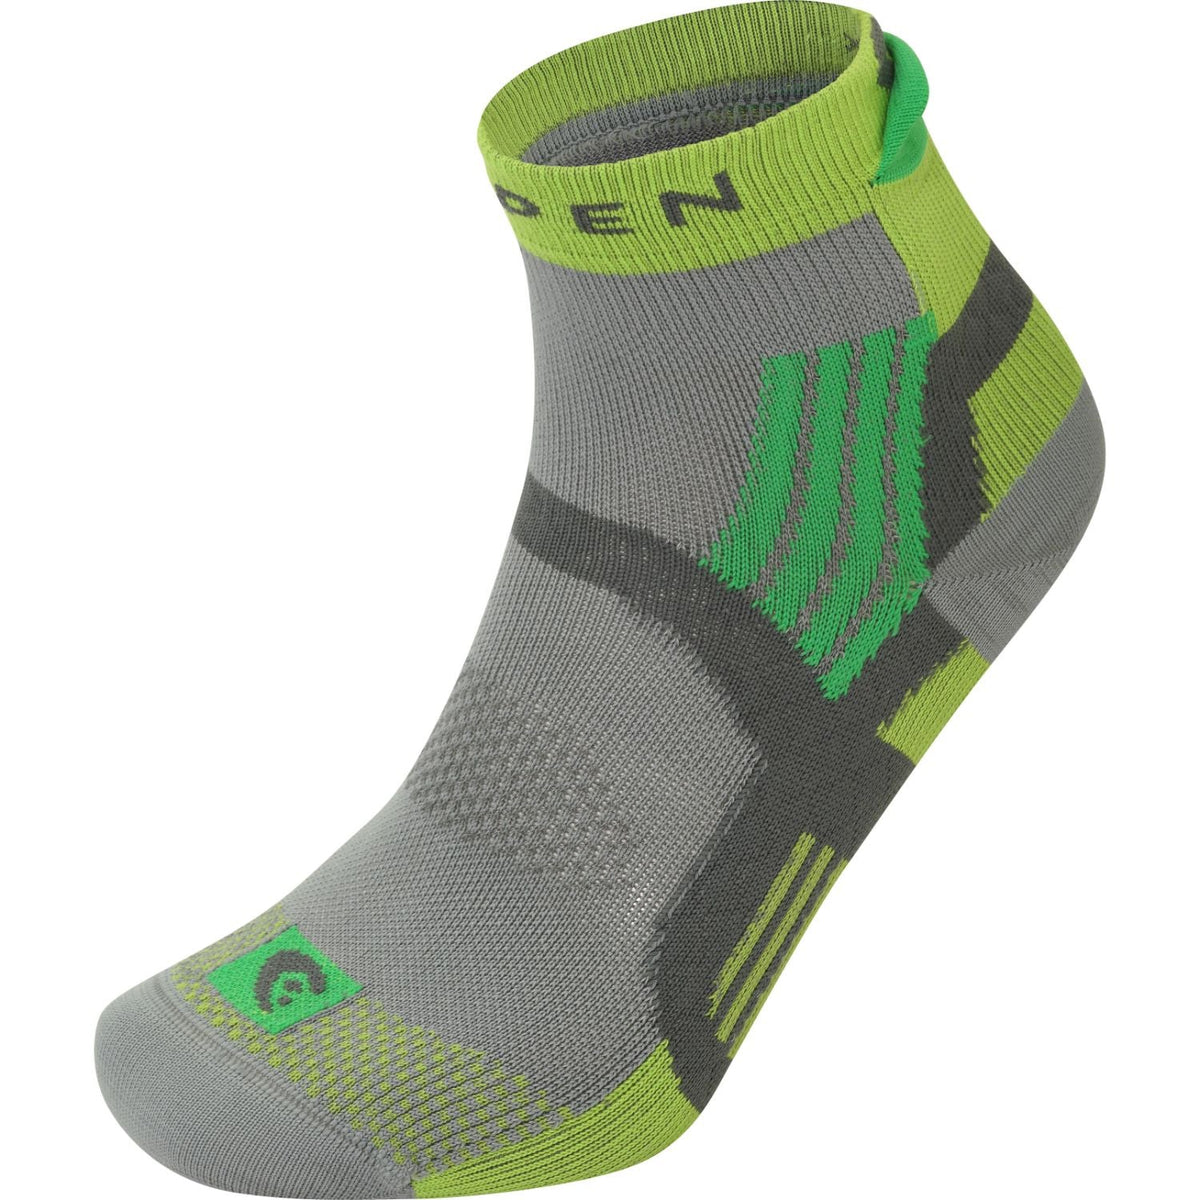 Lorpen Trail Running Eco socks in grey and green